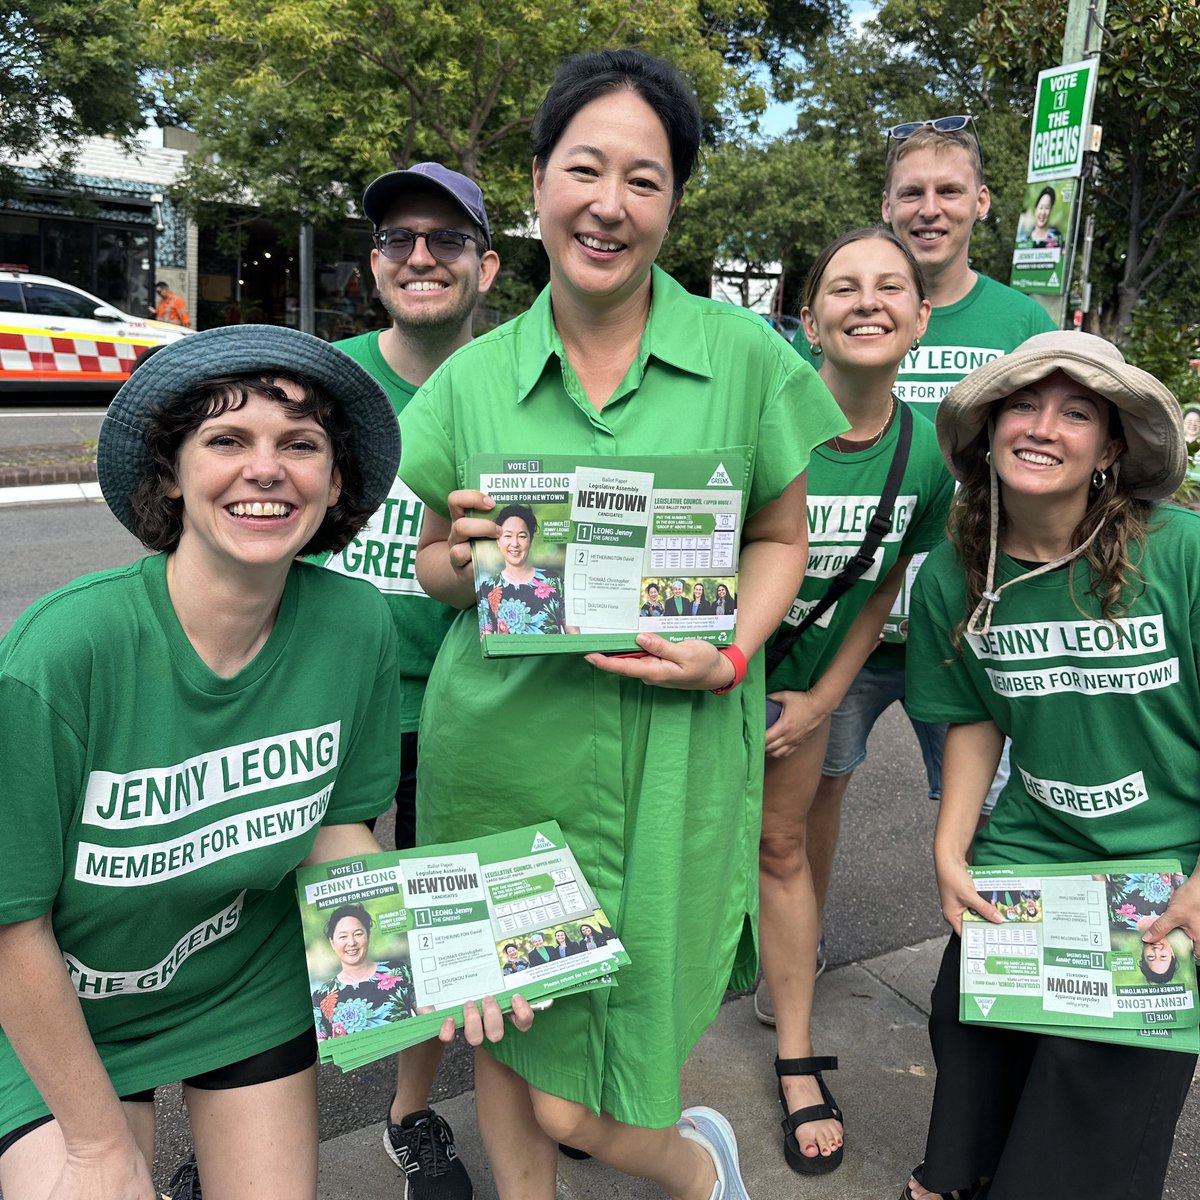 Pre-poll has kicked off, and Greens votes are flowing in at polli...